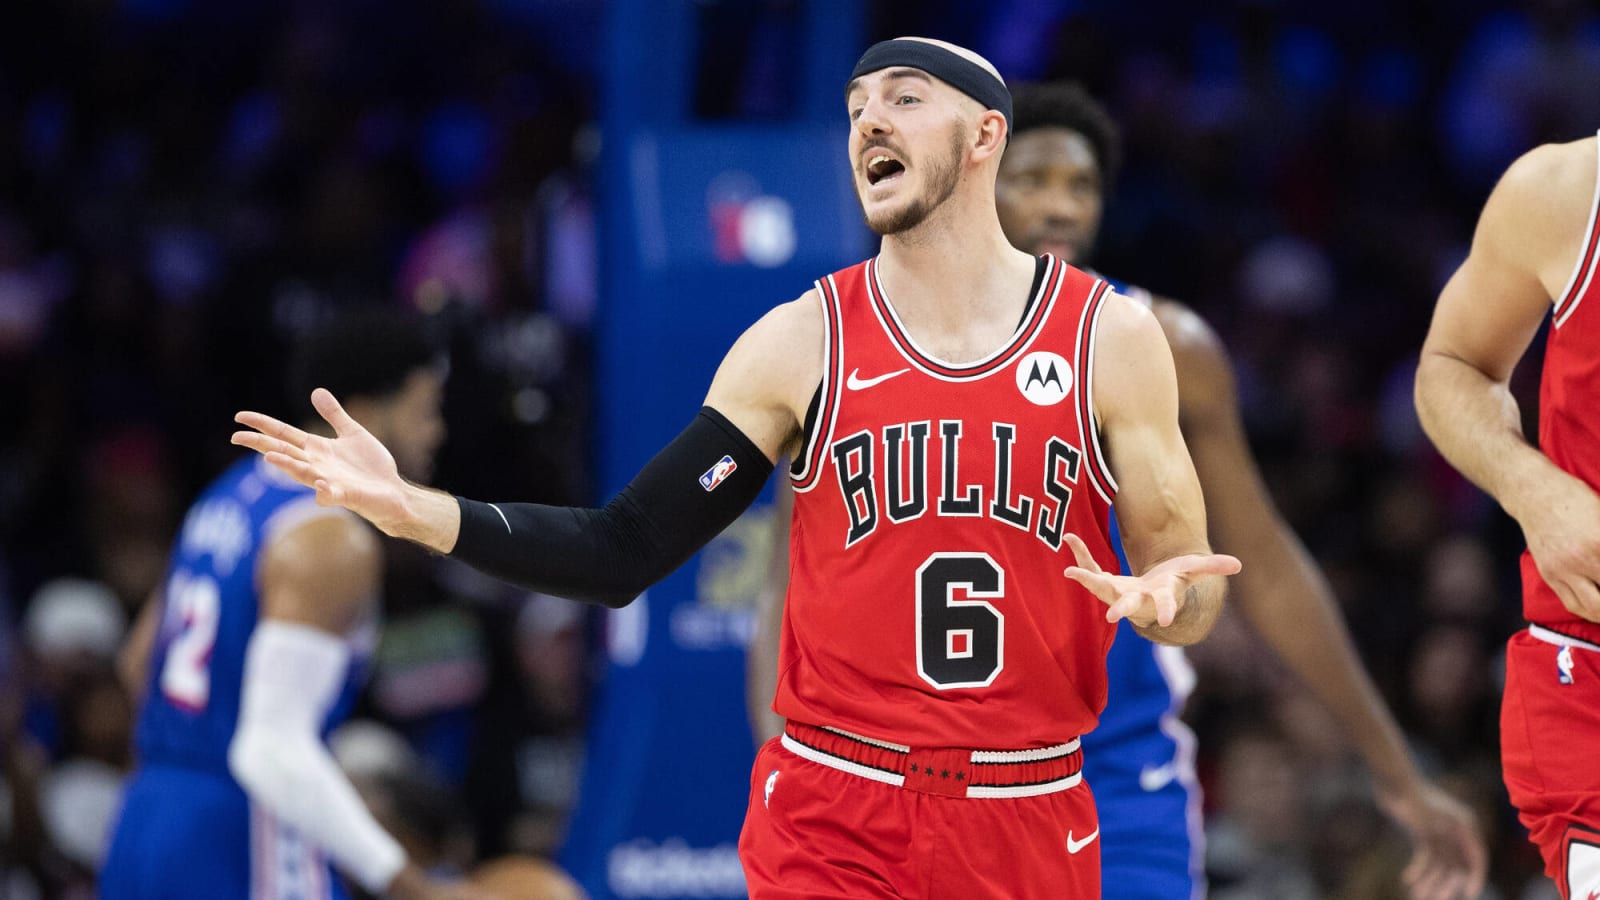 Bulls’ Alex Caruso Doesn’t Hold Back While Talking About Lakers’ LeBron James